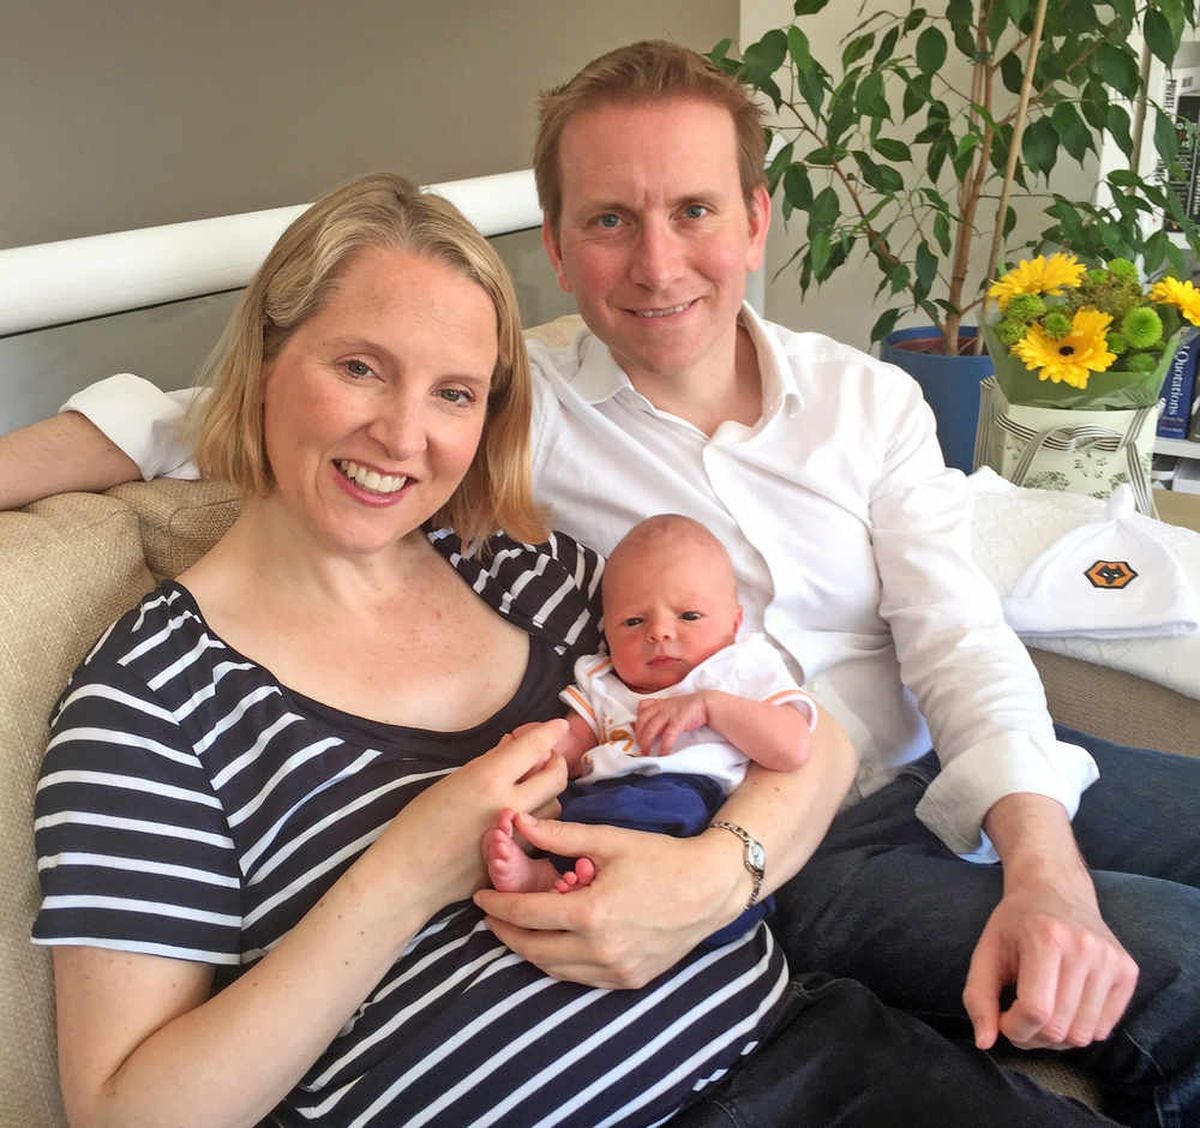 Wolverhampton North East MP Emma Reynolds with her husband Richard and baby Theo